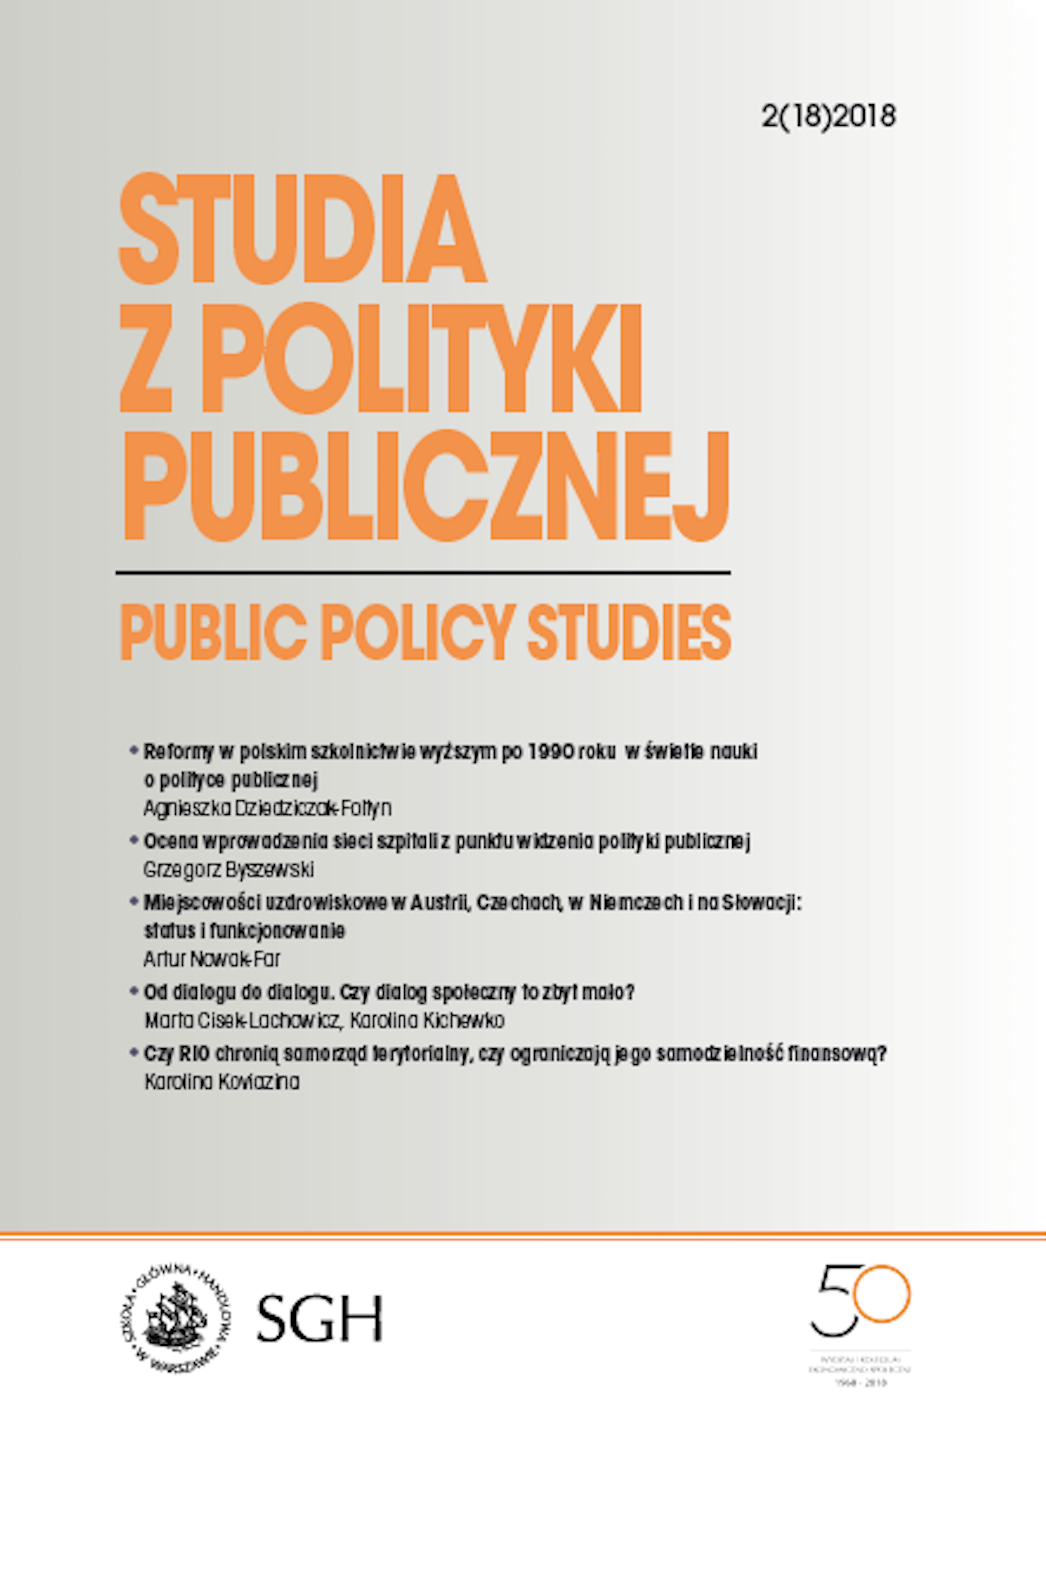 Social participation problems in Poland and the way they influence public policy Cover Image